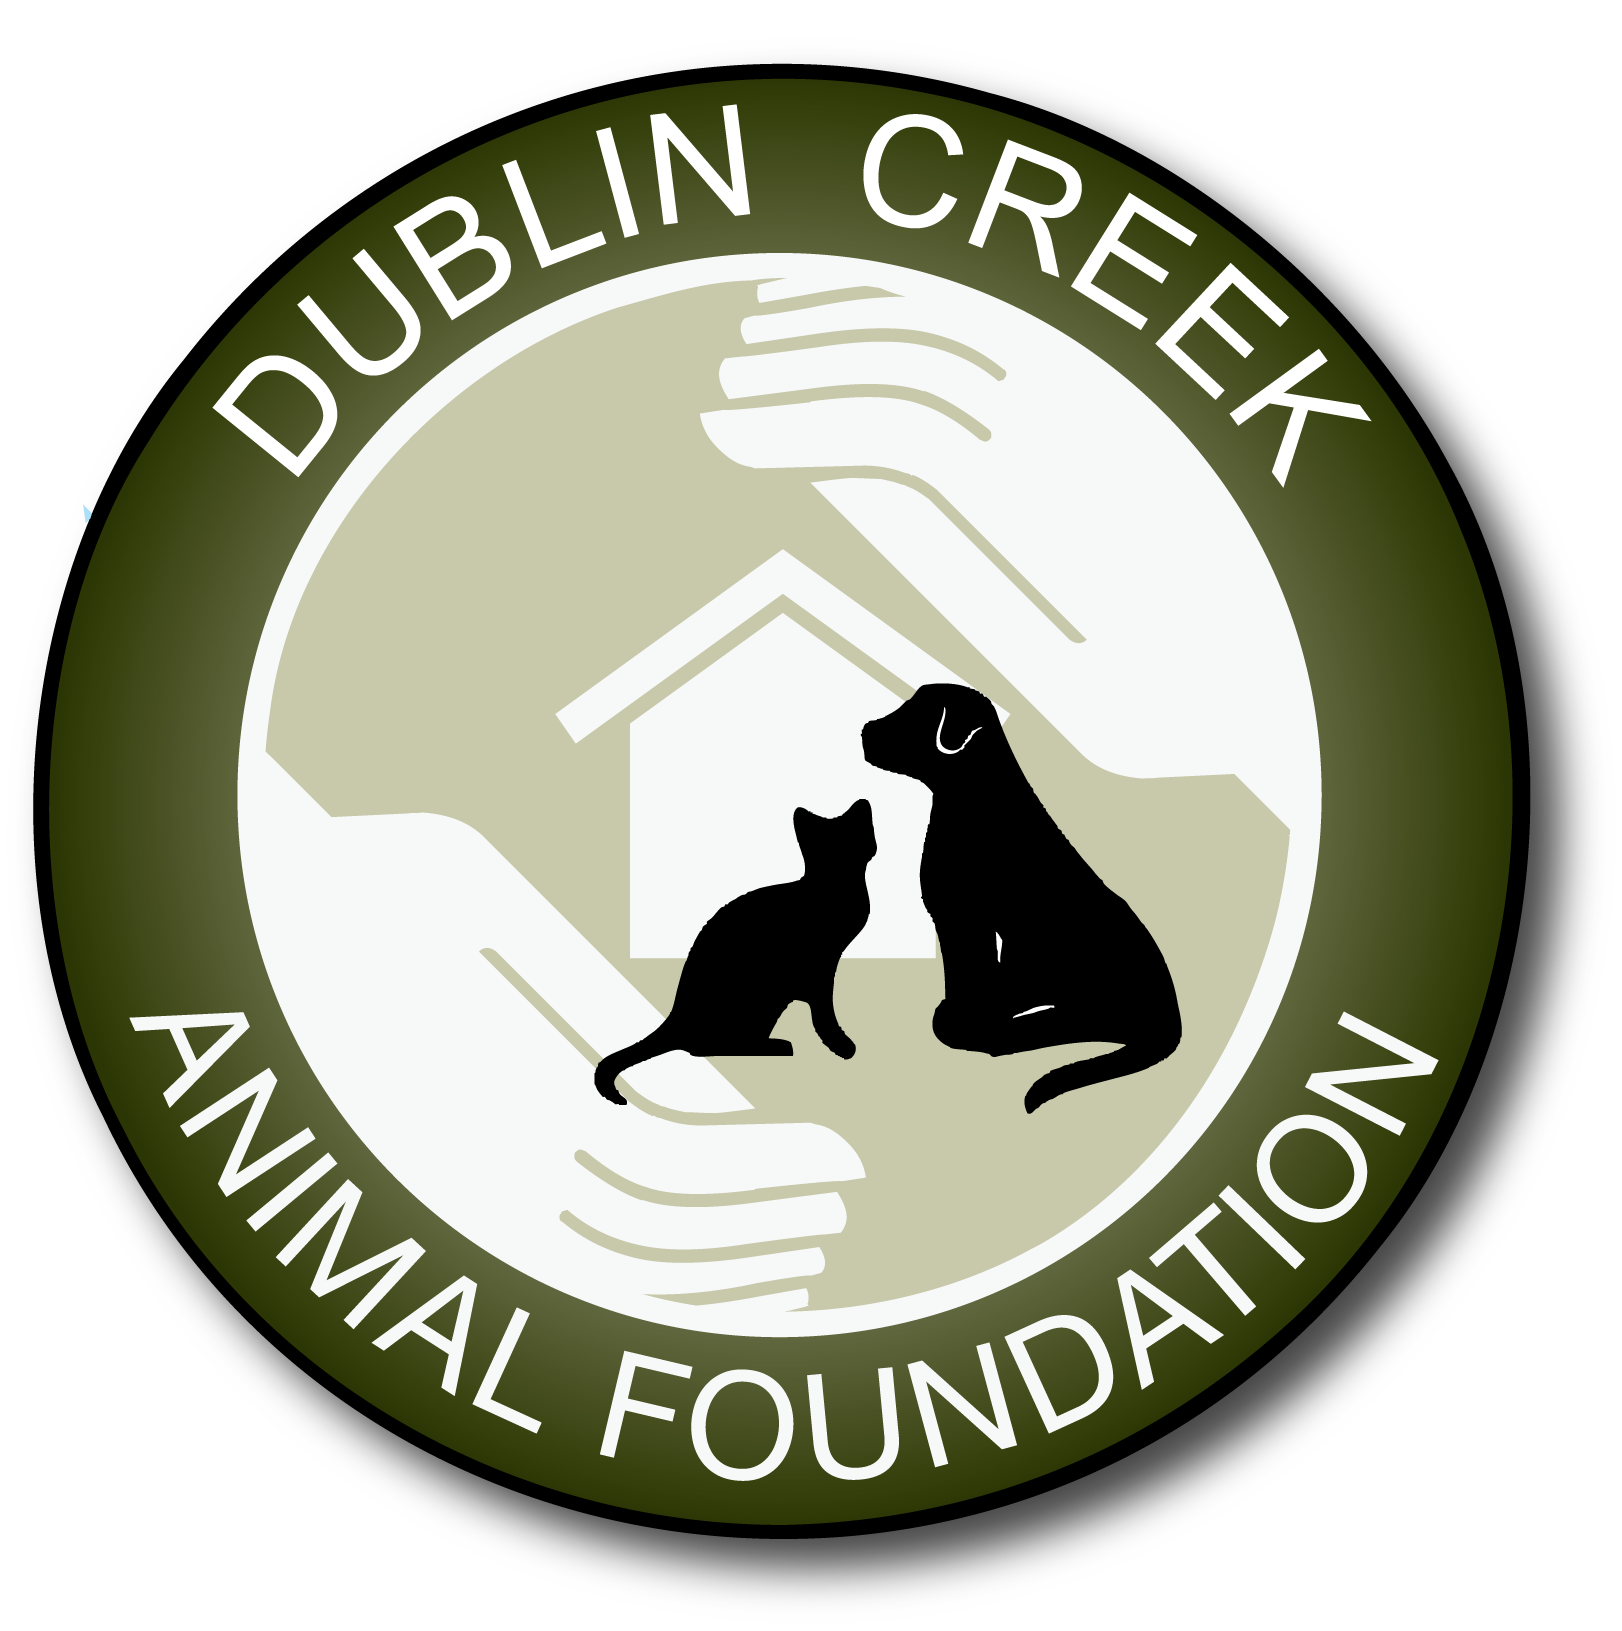 Pets for Adoption  at Dublin  Creek Animal  Foundation in 